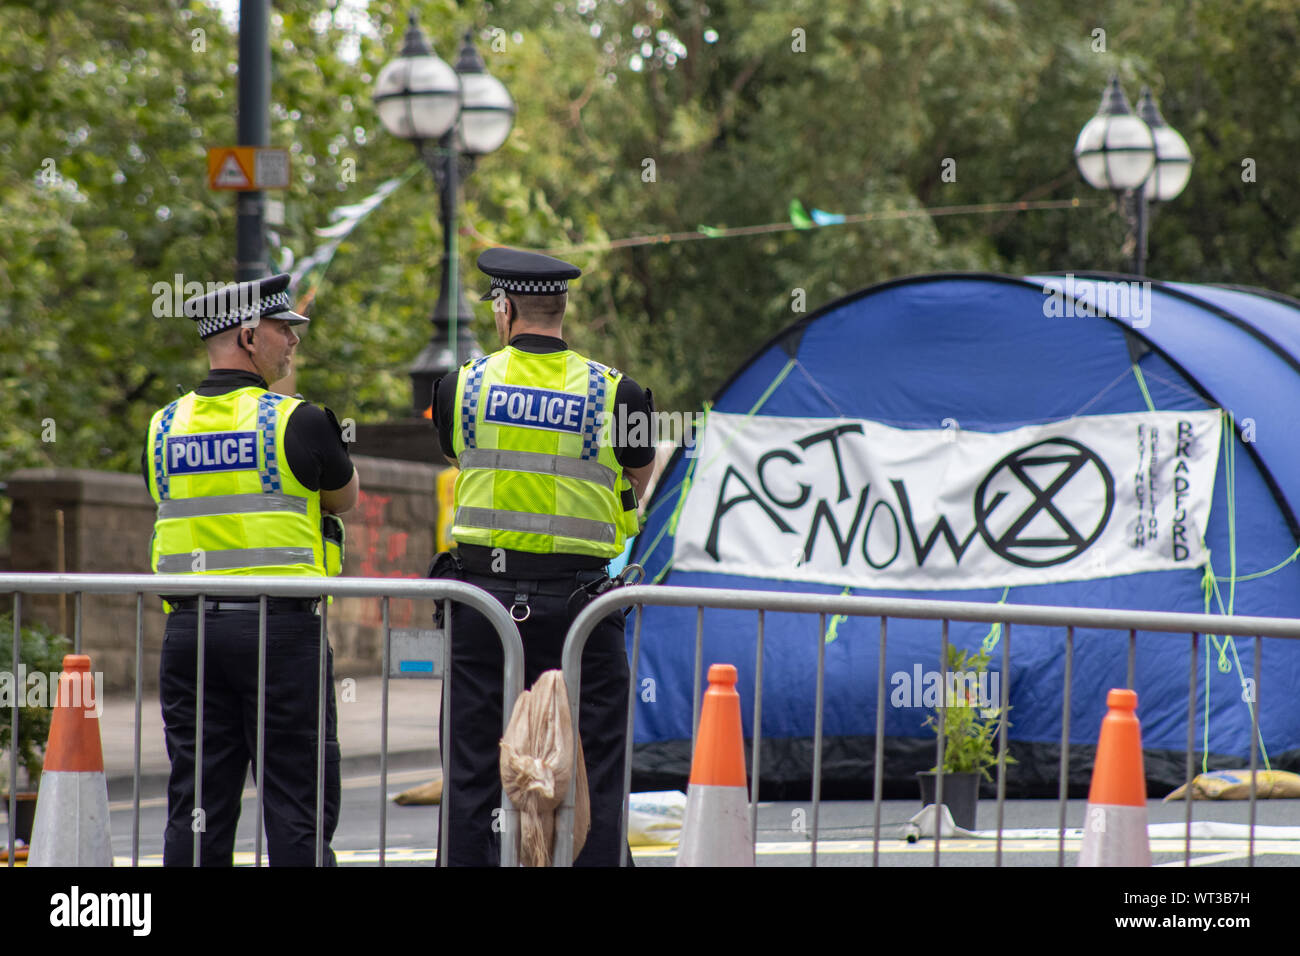 Leeds UK, 18th July 2019: The Extinction Rebellion Protest located in the Leeds City Centre on Victoria Bridge showing West Yorkshire Police officers Stock Photo